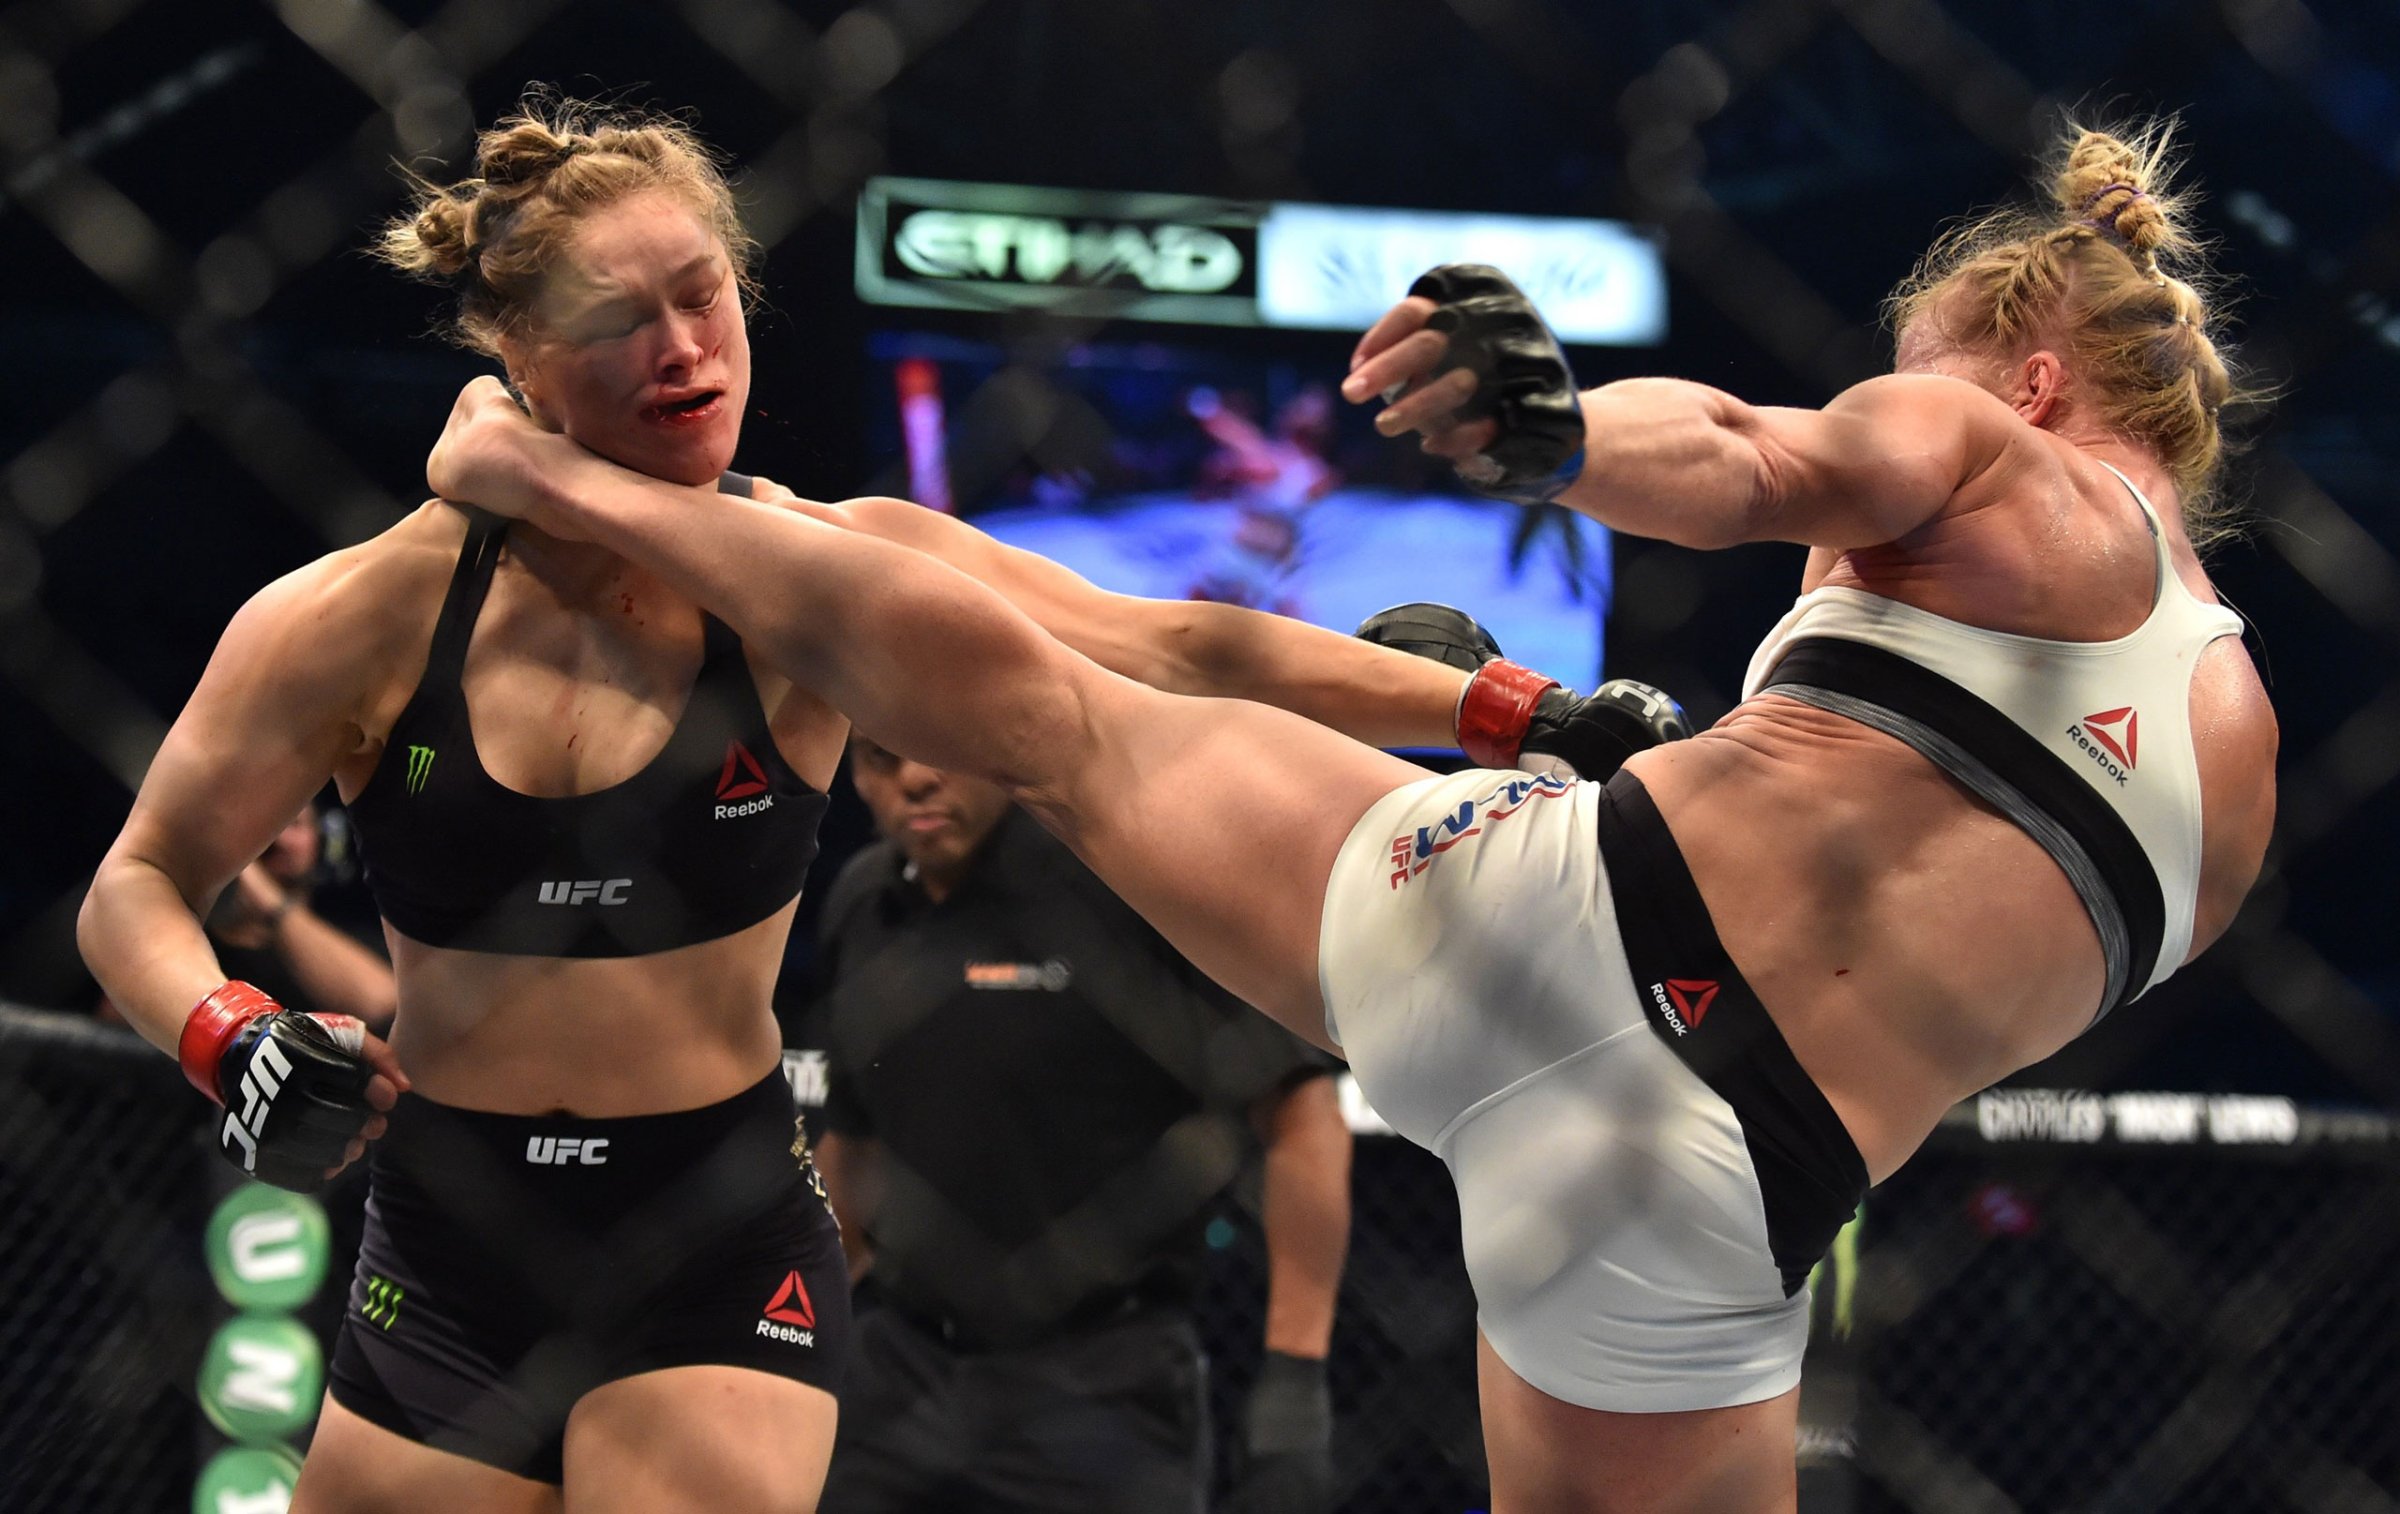 Holly Holm of the U.S. (pictured right) lands a kick to the neck to knock out compatriot Ronda Rousey and wins the Ultimate Fighting Championship (UFC) title fight in Melbourne, Australia. Nov. 15, 2015.